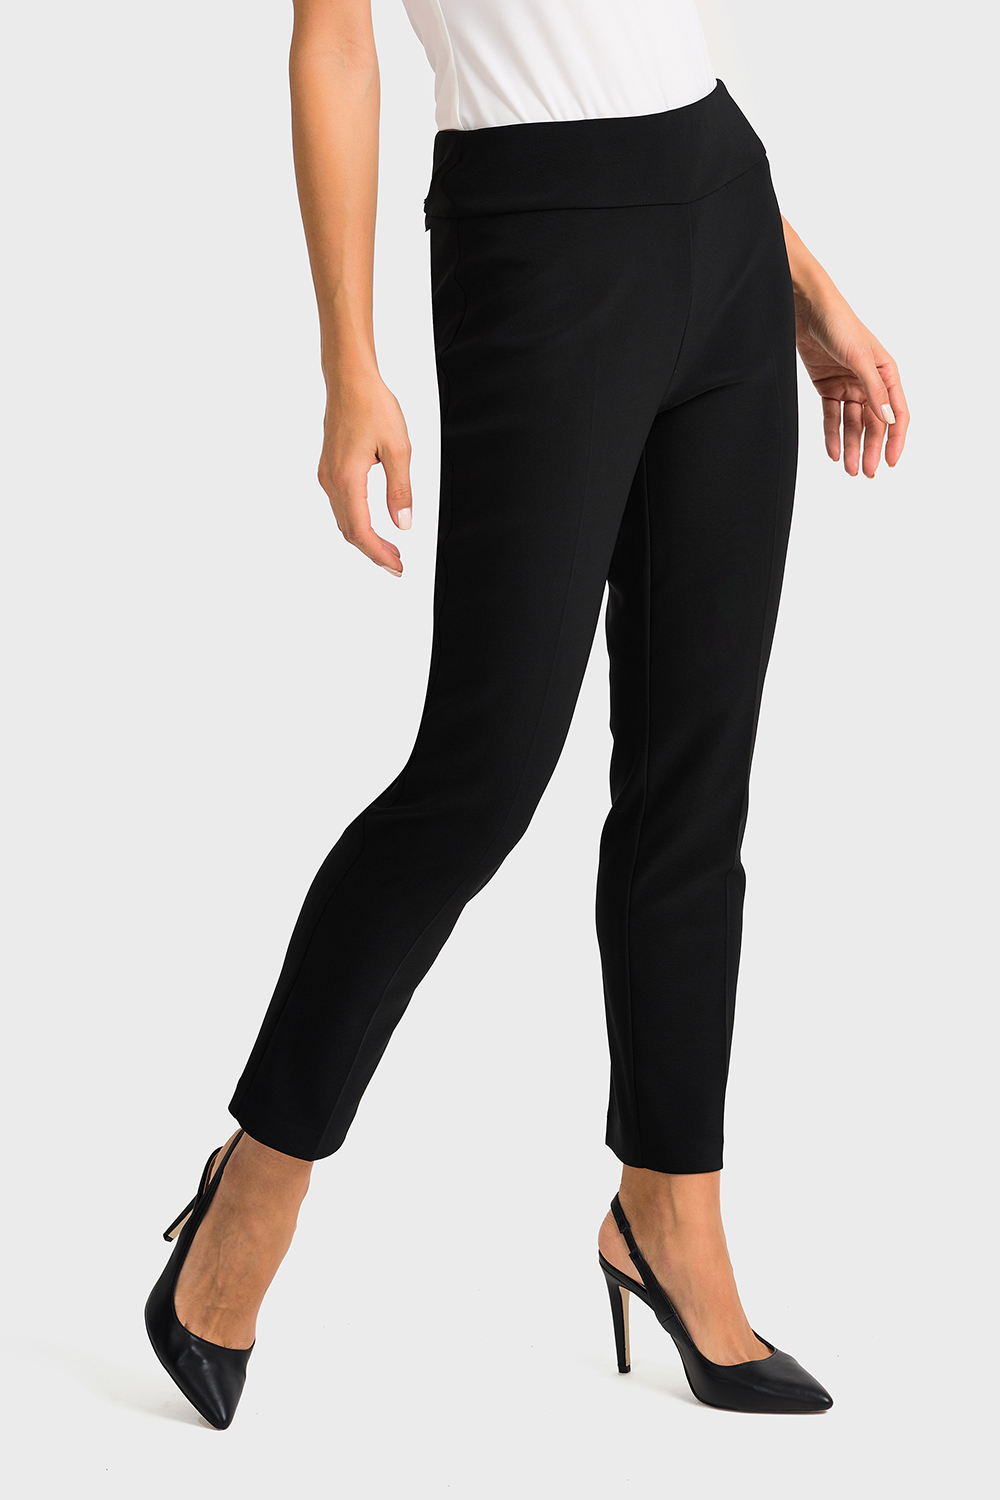 Buy Ankle Length Pant Dark Gray and Beige Combo of 2 Rayon for Best Price,  Reviews, Free Shipping